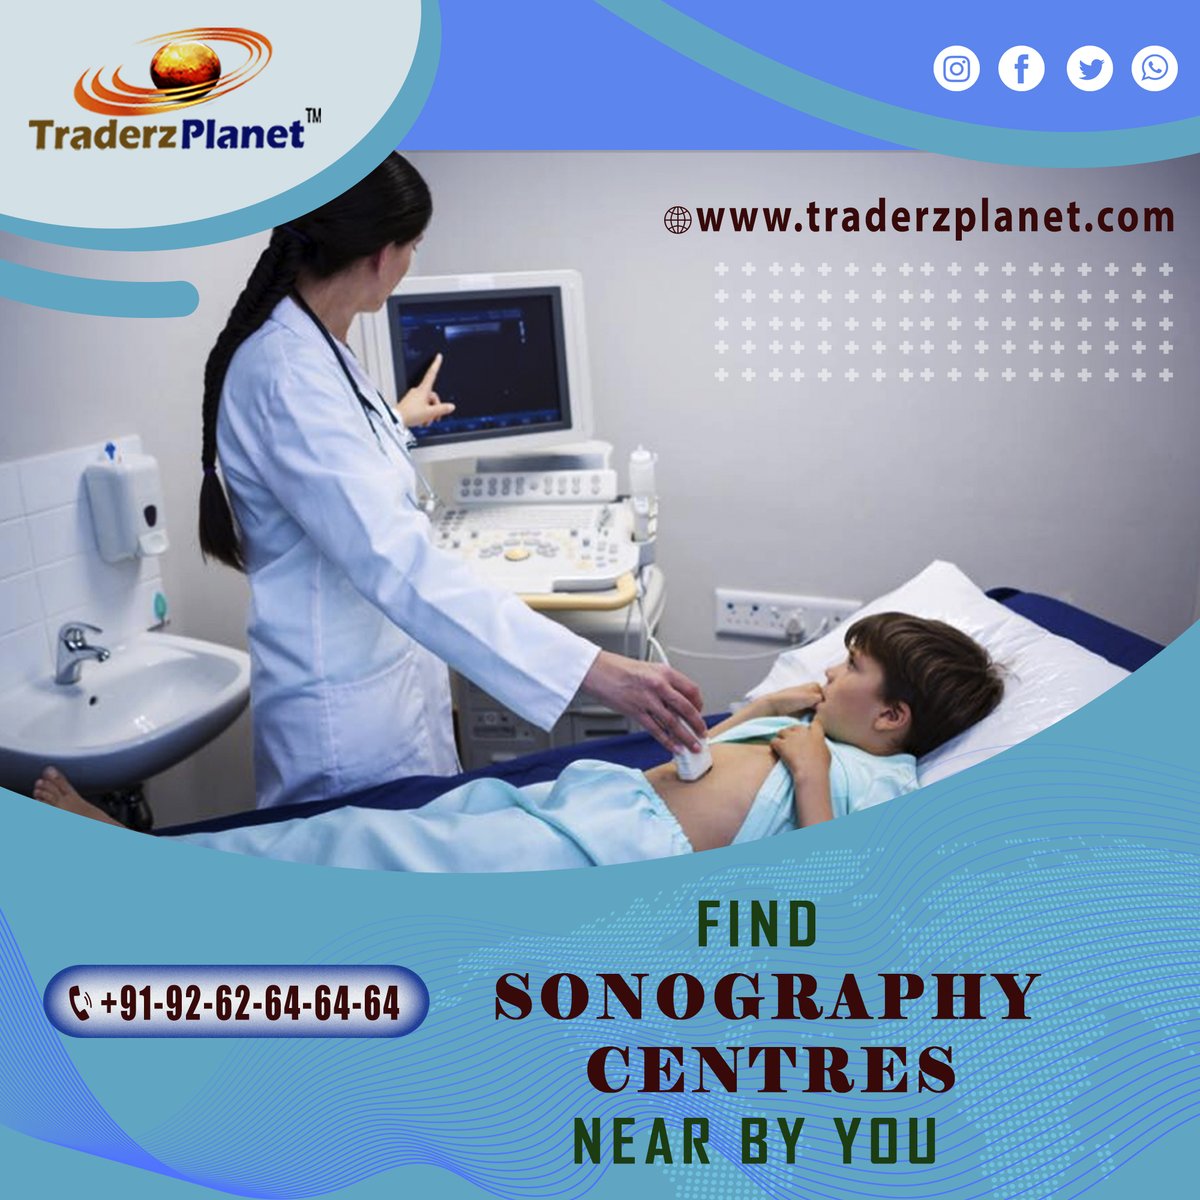 TraderzPlanet is always there for you indeed!
#diagnostic #3d #ultrasoundstudent #sonologists #sonography #sharing #nose #fetalpole #drferdoussharmin #different #baby #usg
Anything Anytime Anywhere You Want-Only One Call 92-62-64-64-64